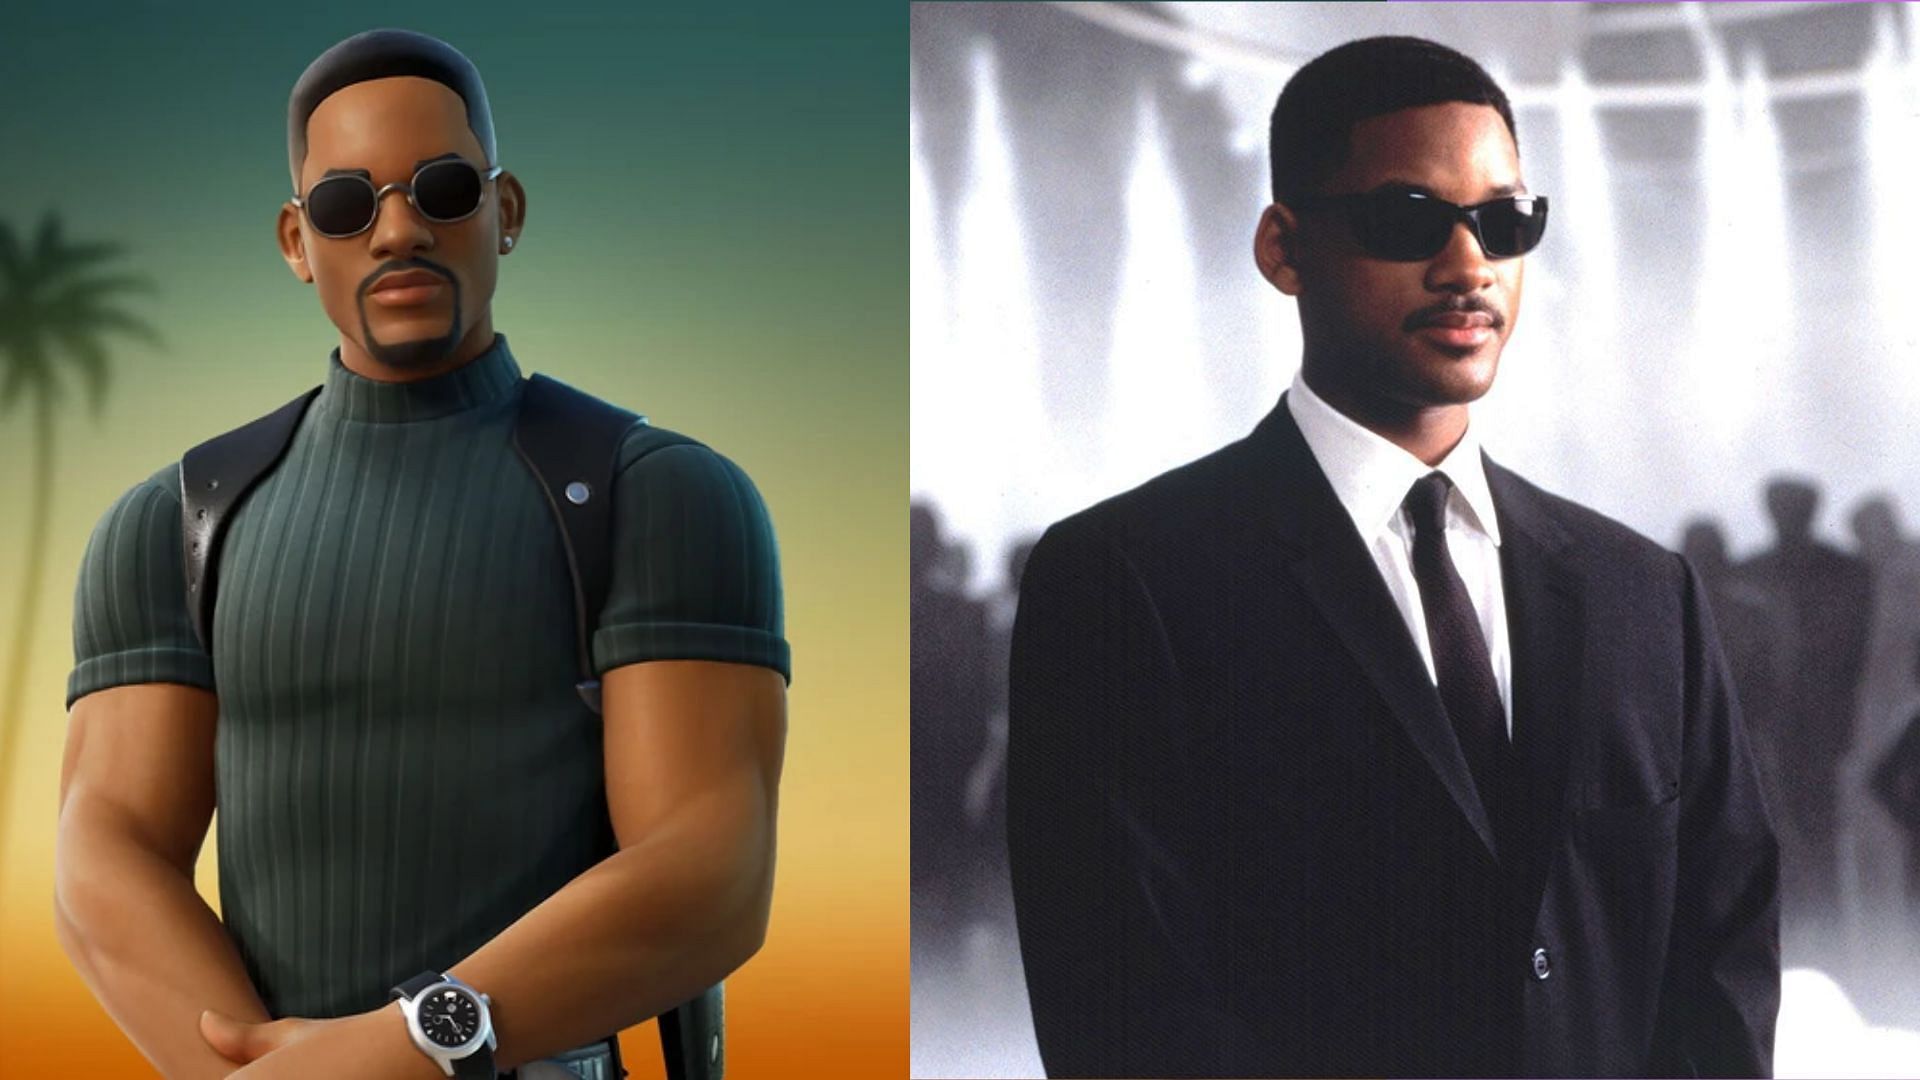 Fortnite Men In Black collaboration would be a dream come true, but there